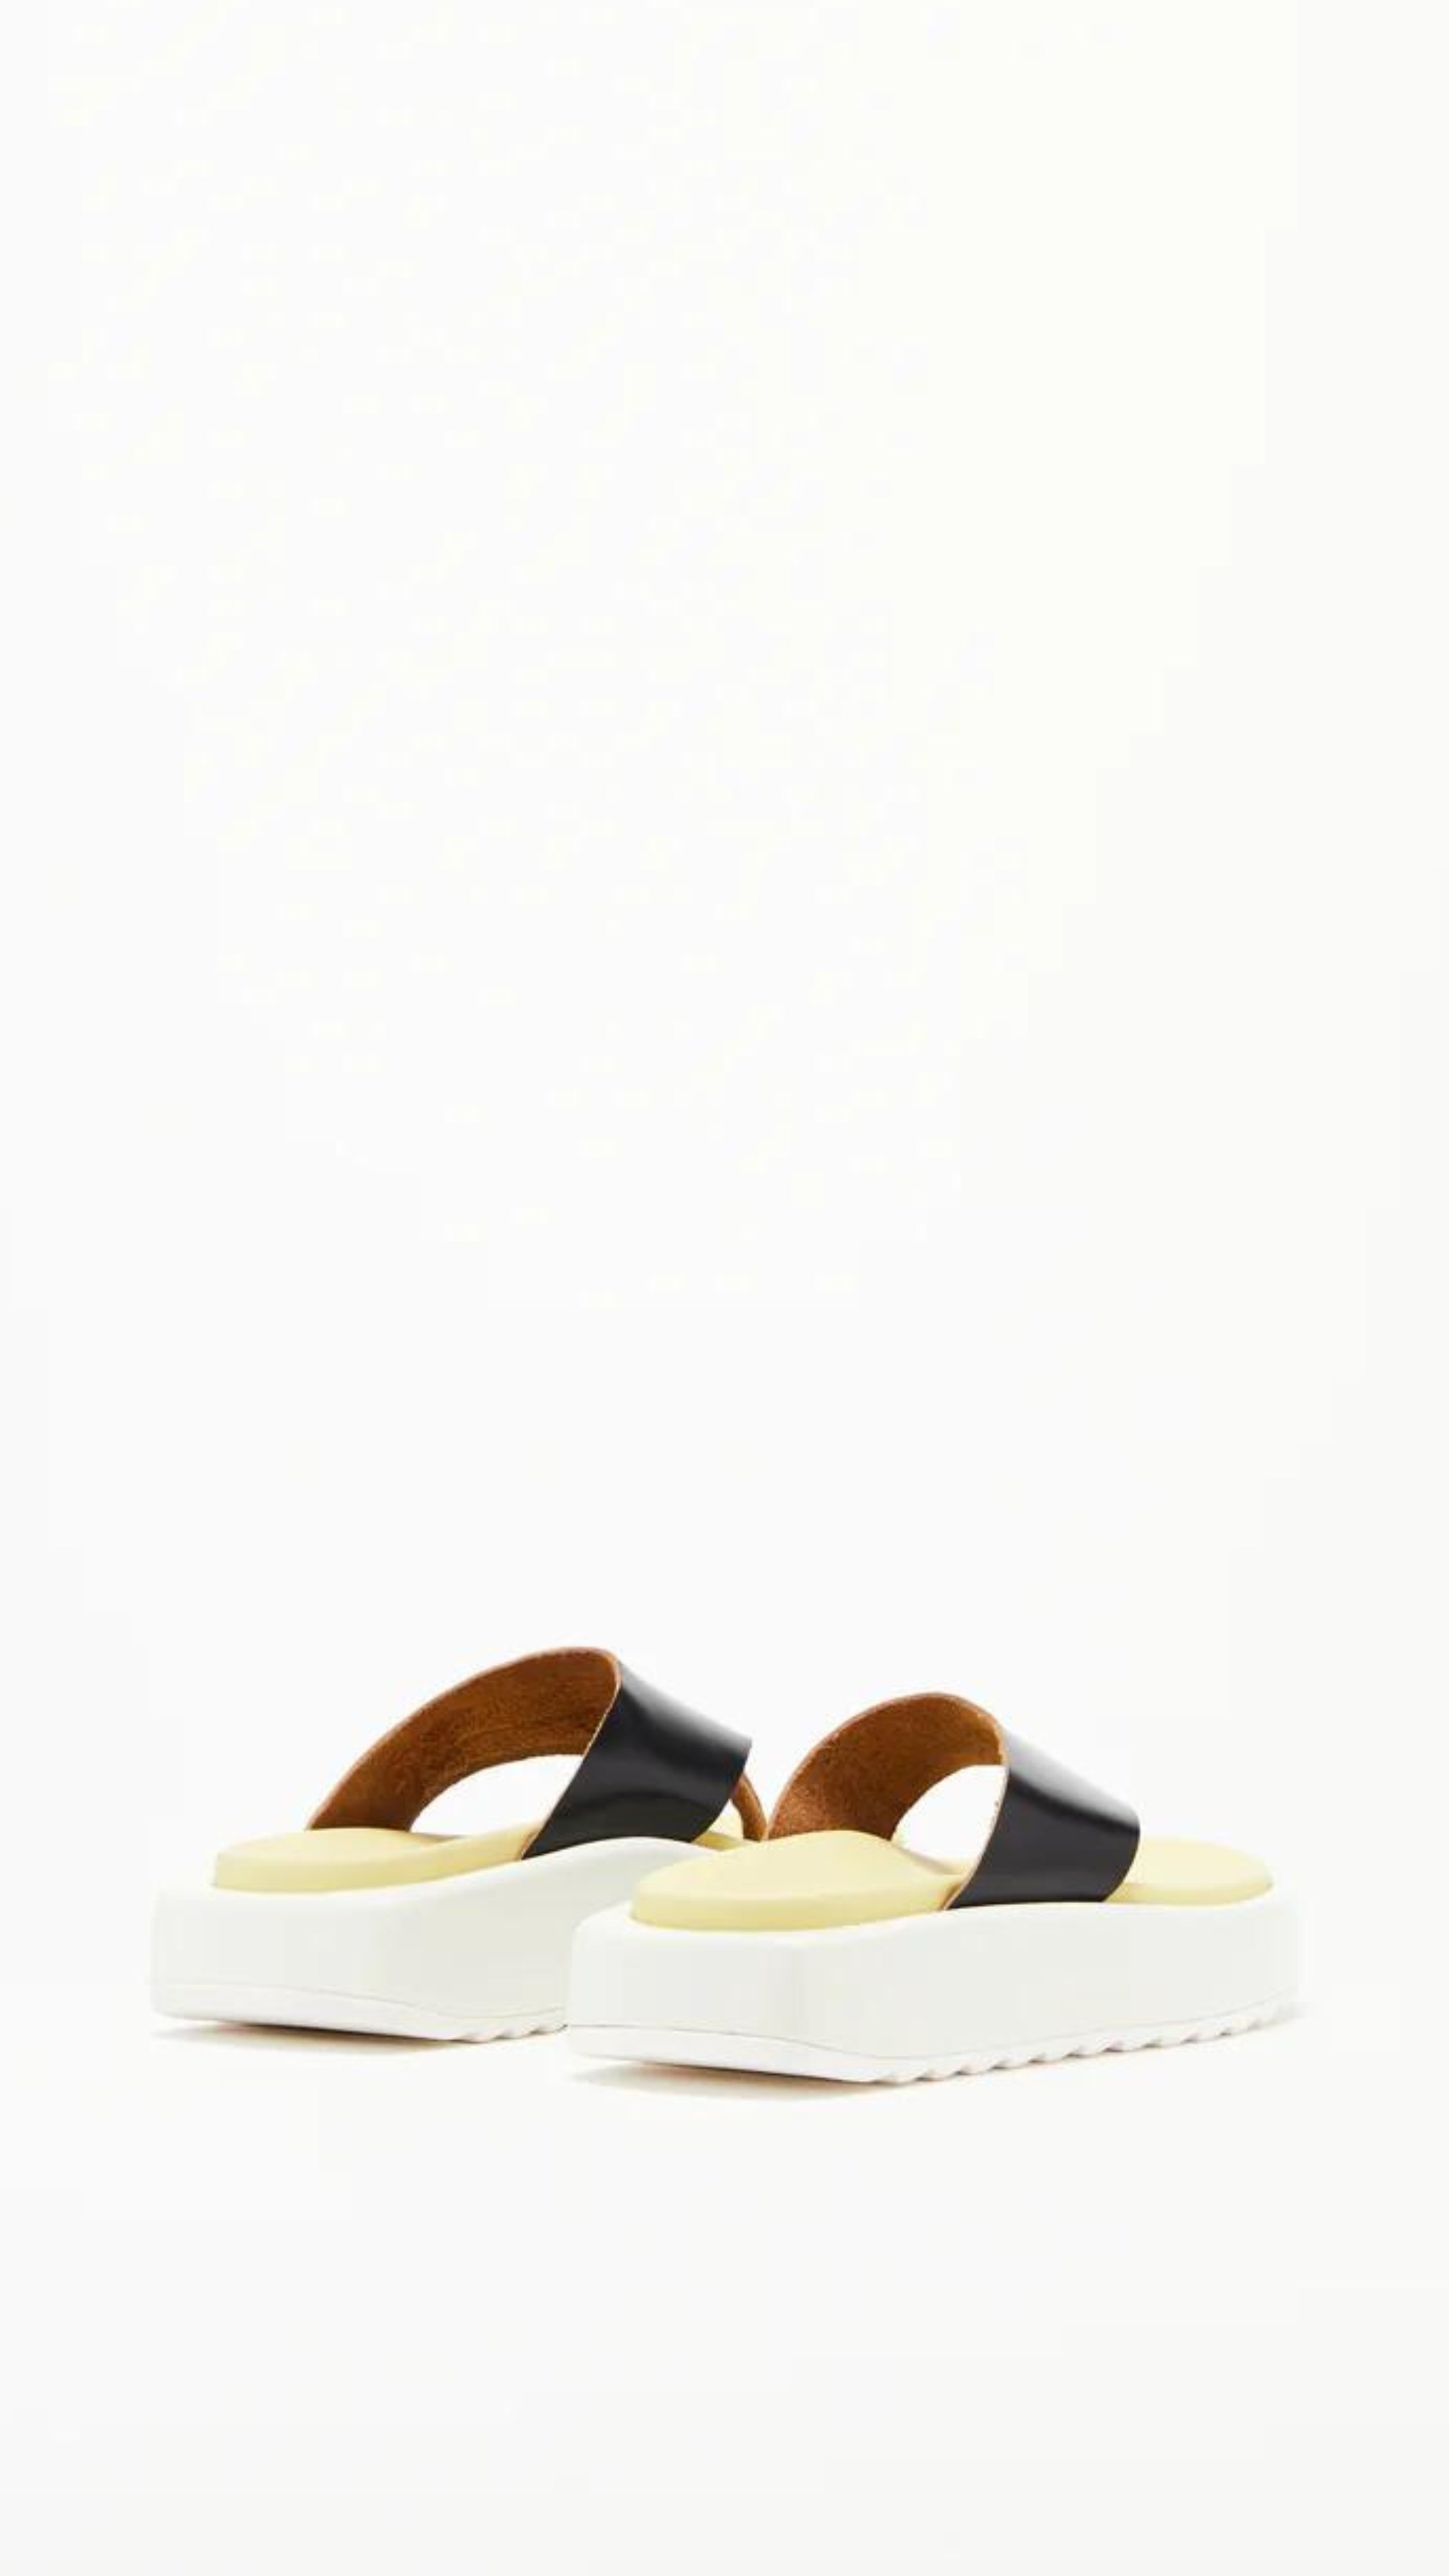 Plan C Platform Thong Sandal. Made in Italy the thong leather detail is in black with the sole interior in a pale yellow. With a slight platform, the outer edges are in white. Photo shown from the back.